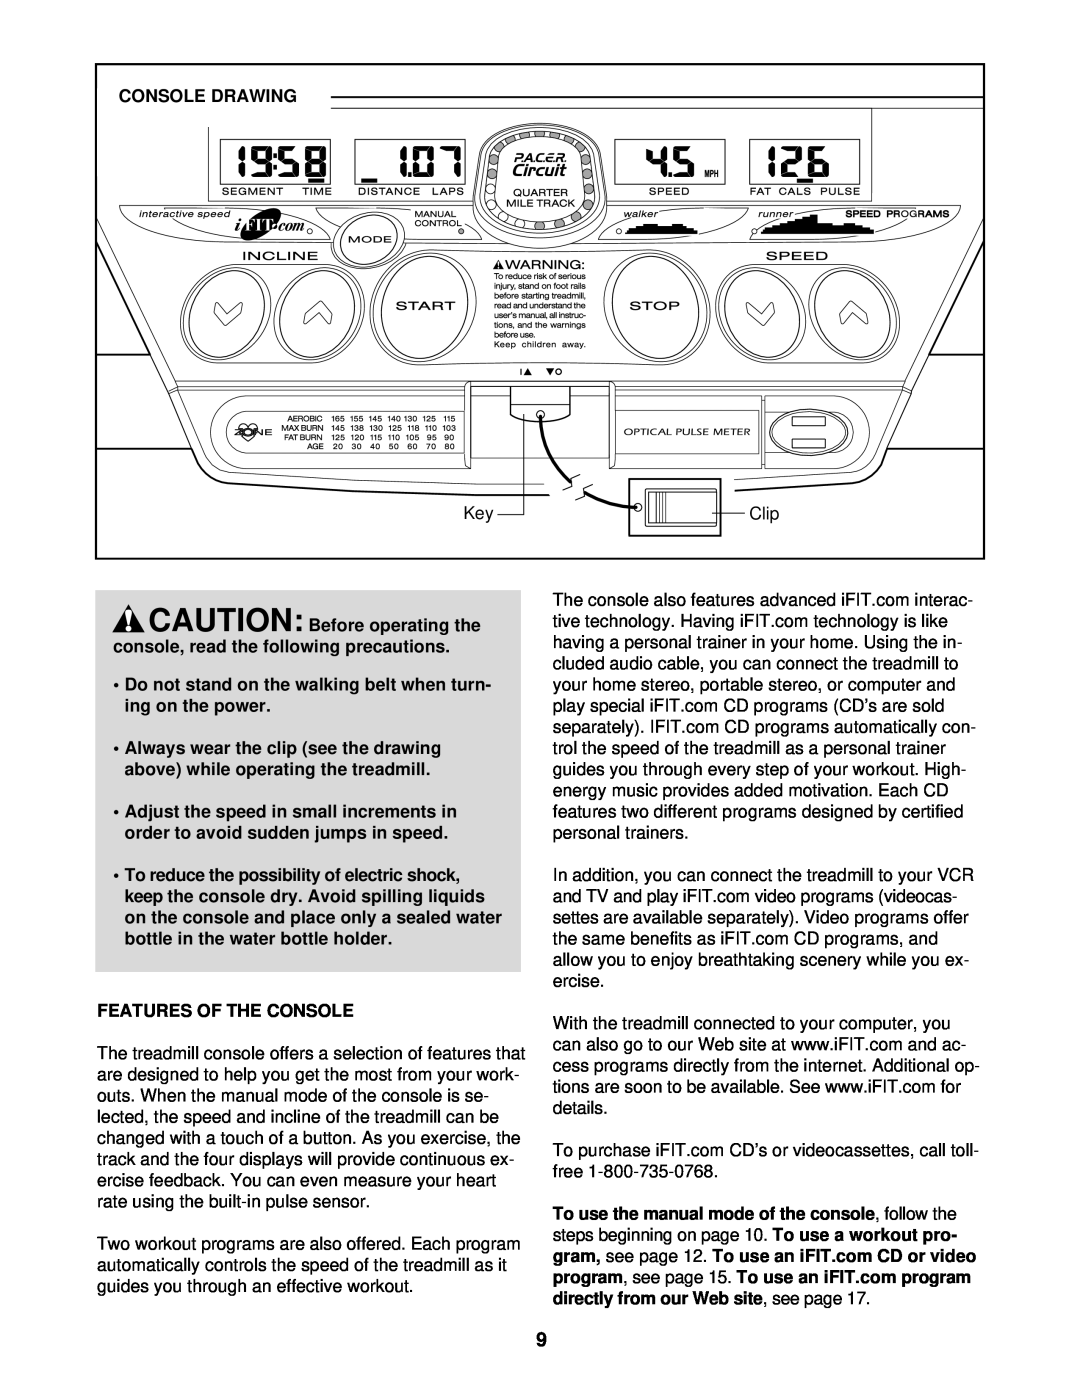 ProForm 831.293040 user manual Console Drawing, CAUTION Before operating the console, read the following precautions 